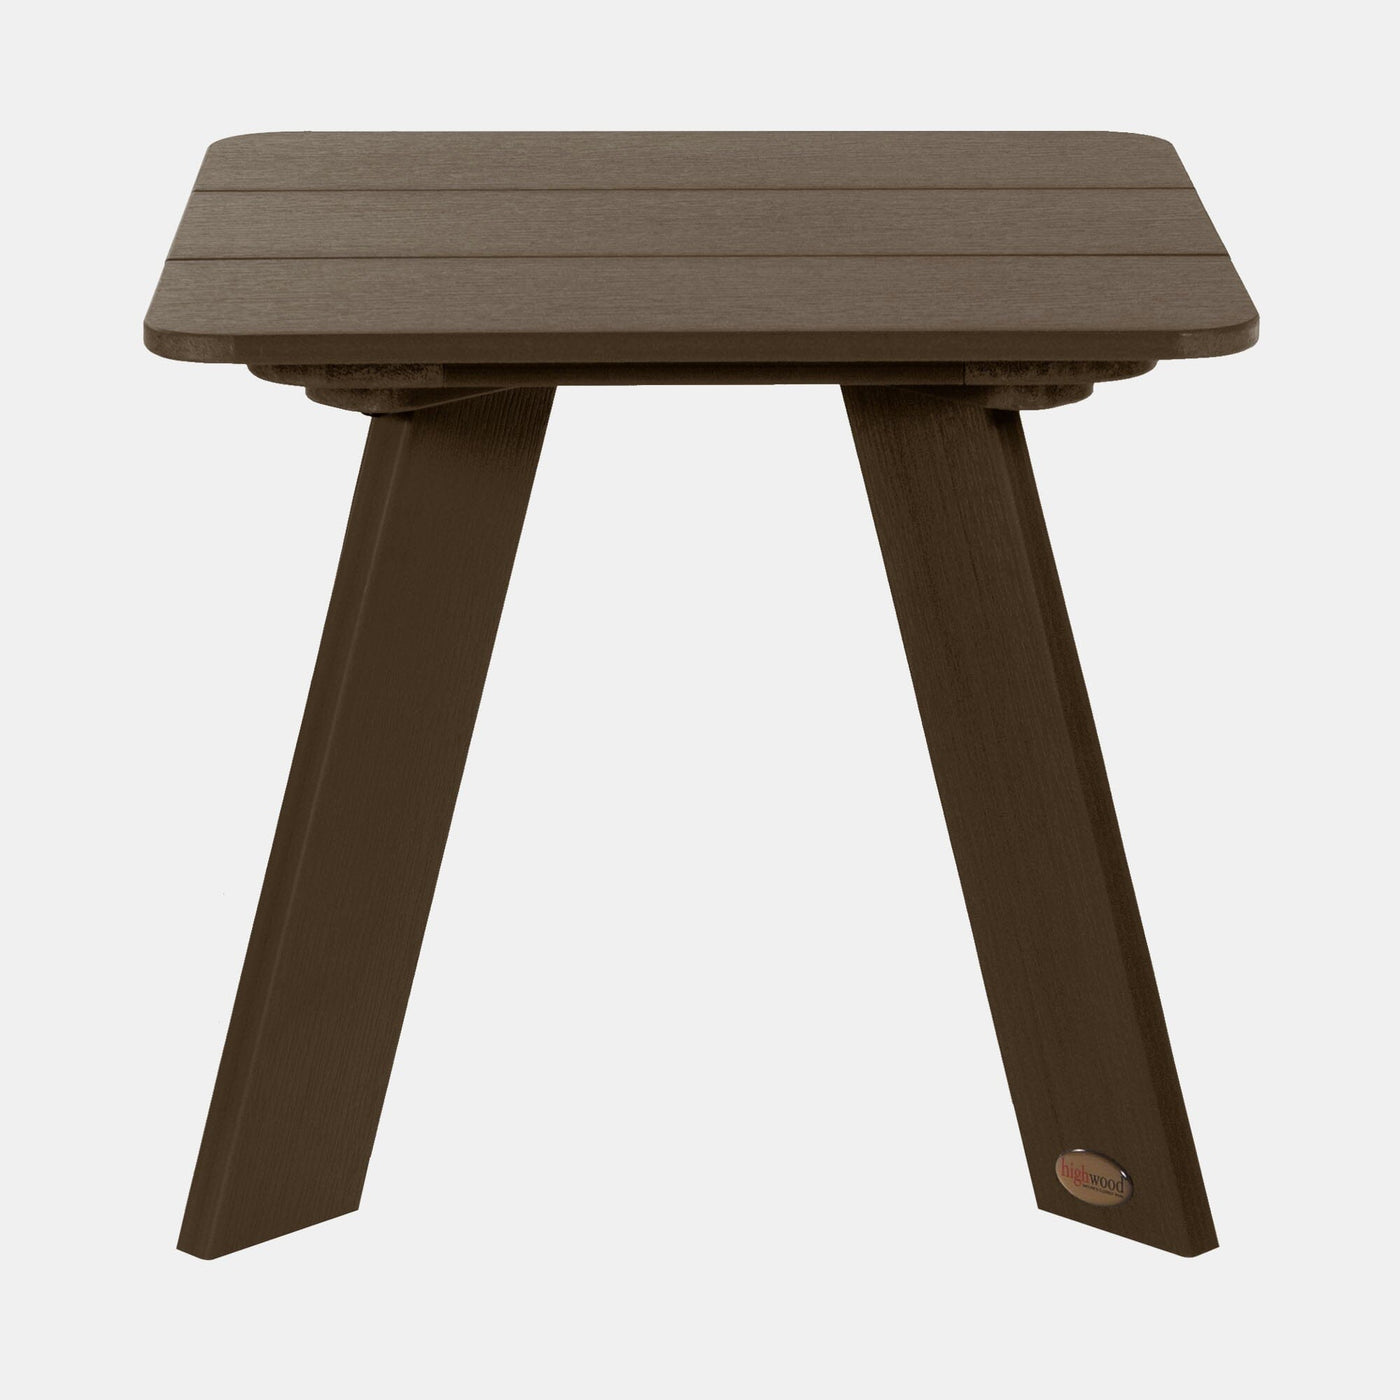 Front view of Italica Modern side table in Weathered Acorn Brown